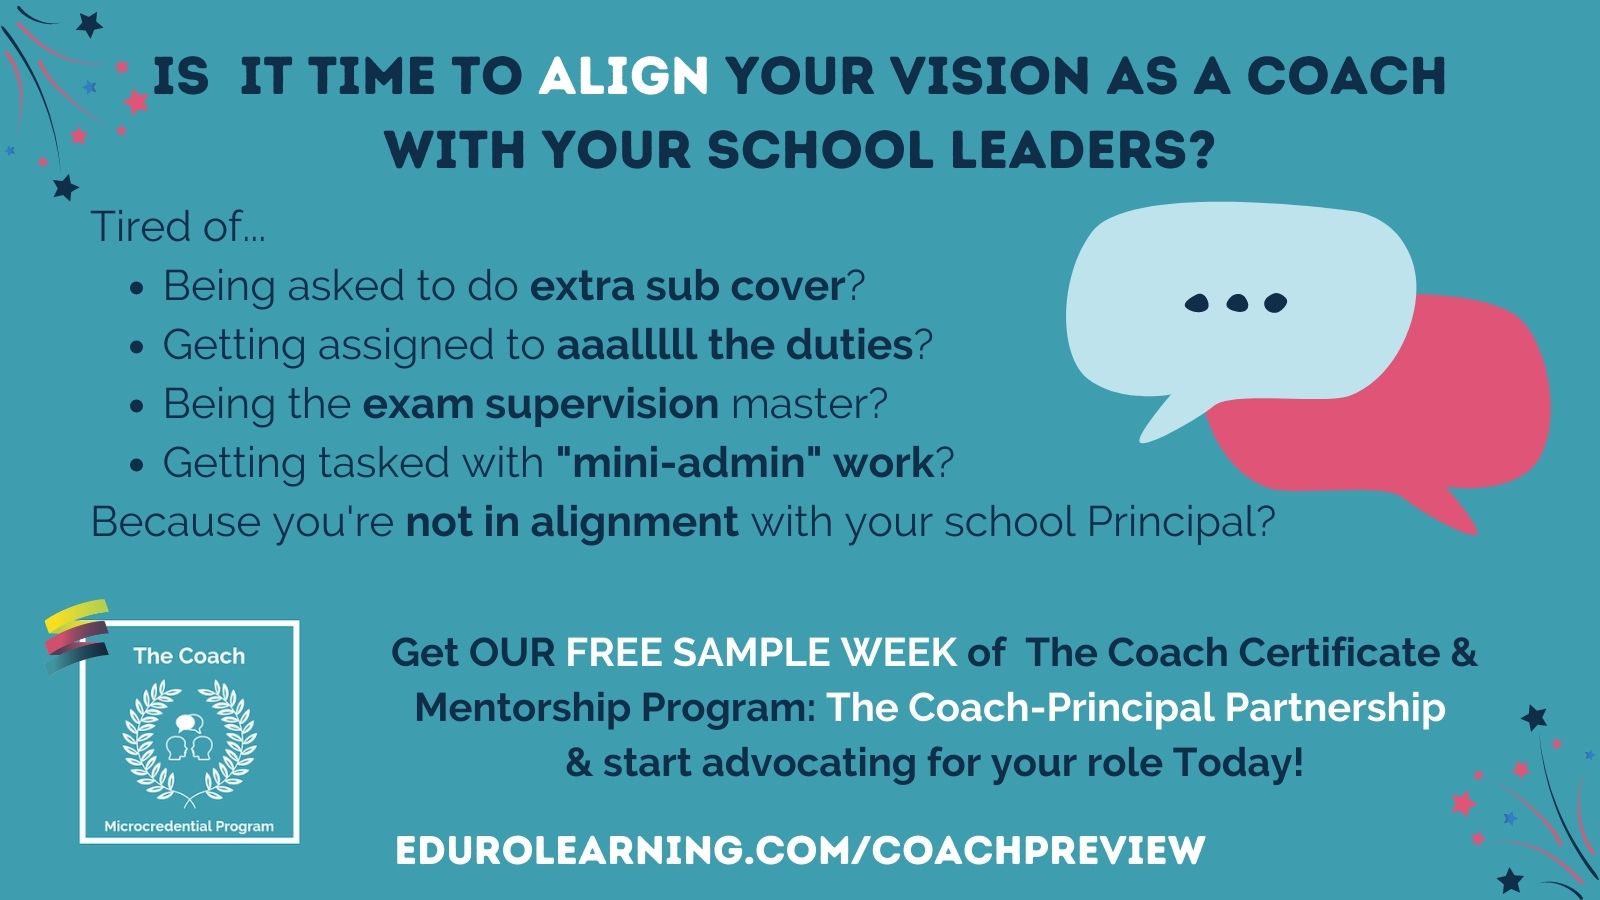 Find Alignment in Your Coaching Role with Your School Leader